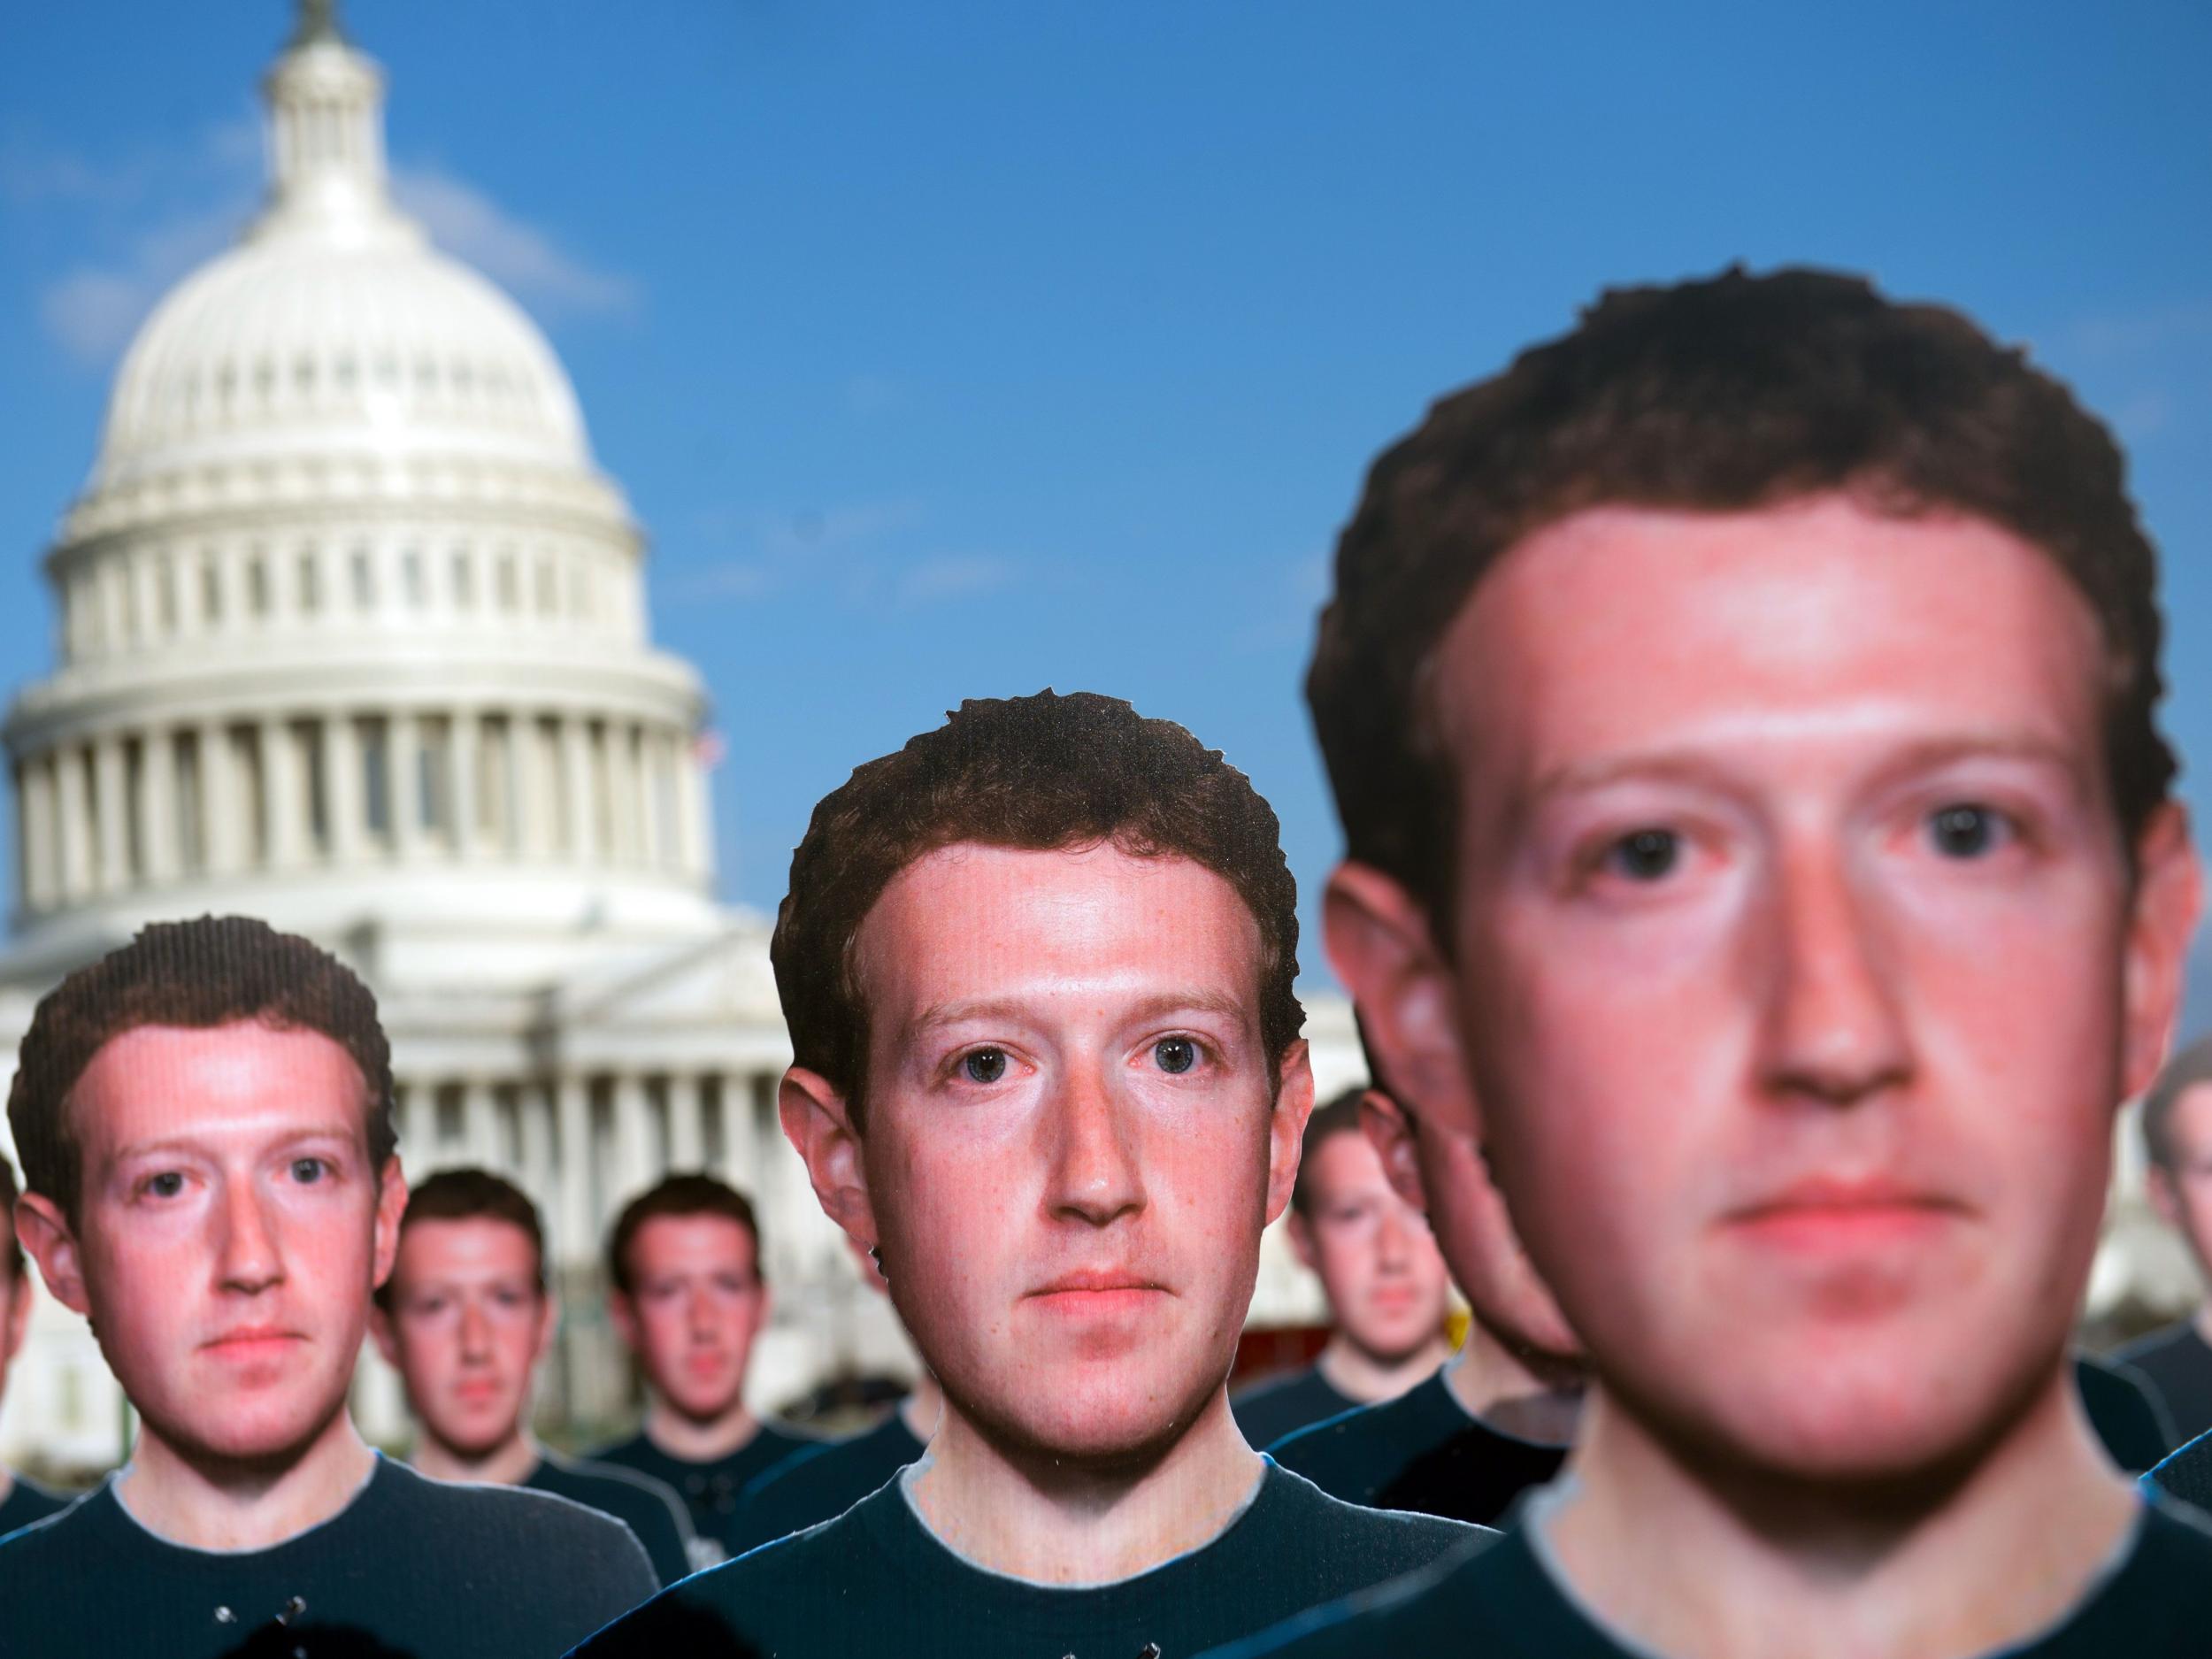 Facebook CEO Mark Zuckerberg has overseen one of the most serially scandalous periods in Silicon Valley history